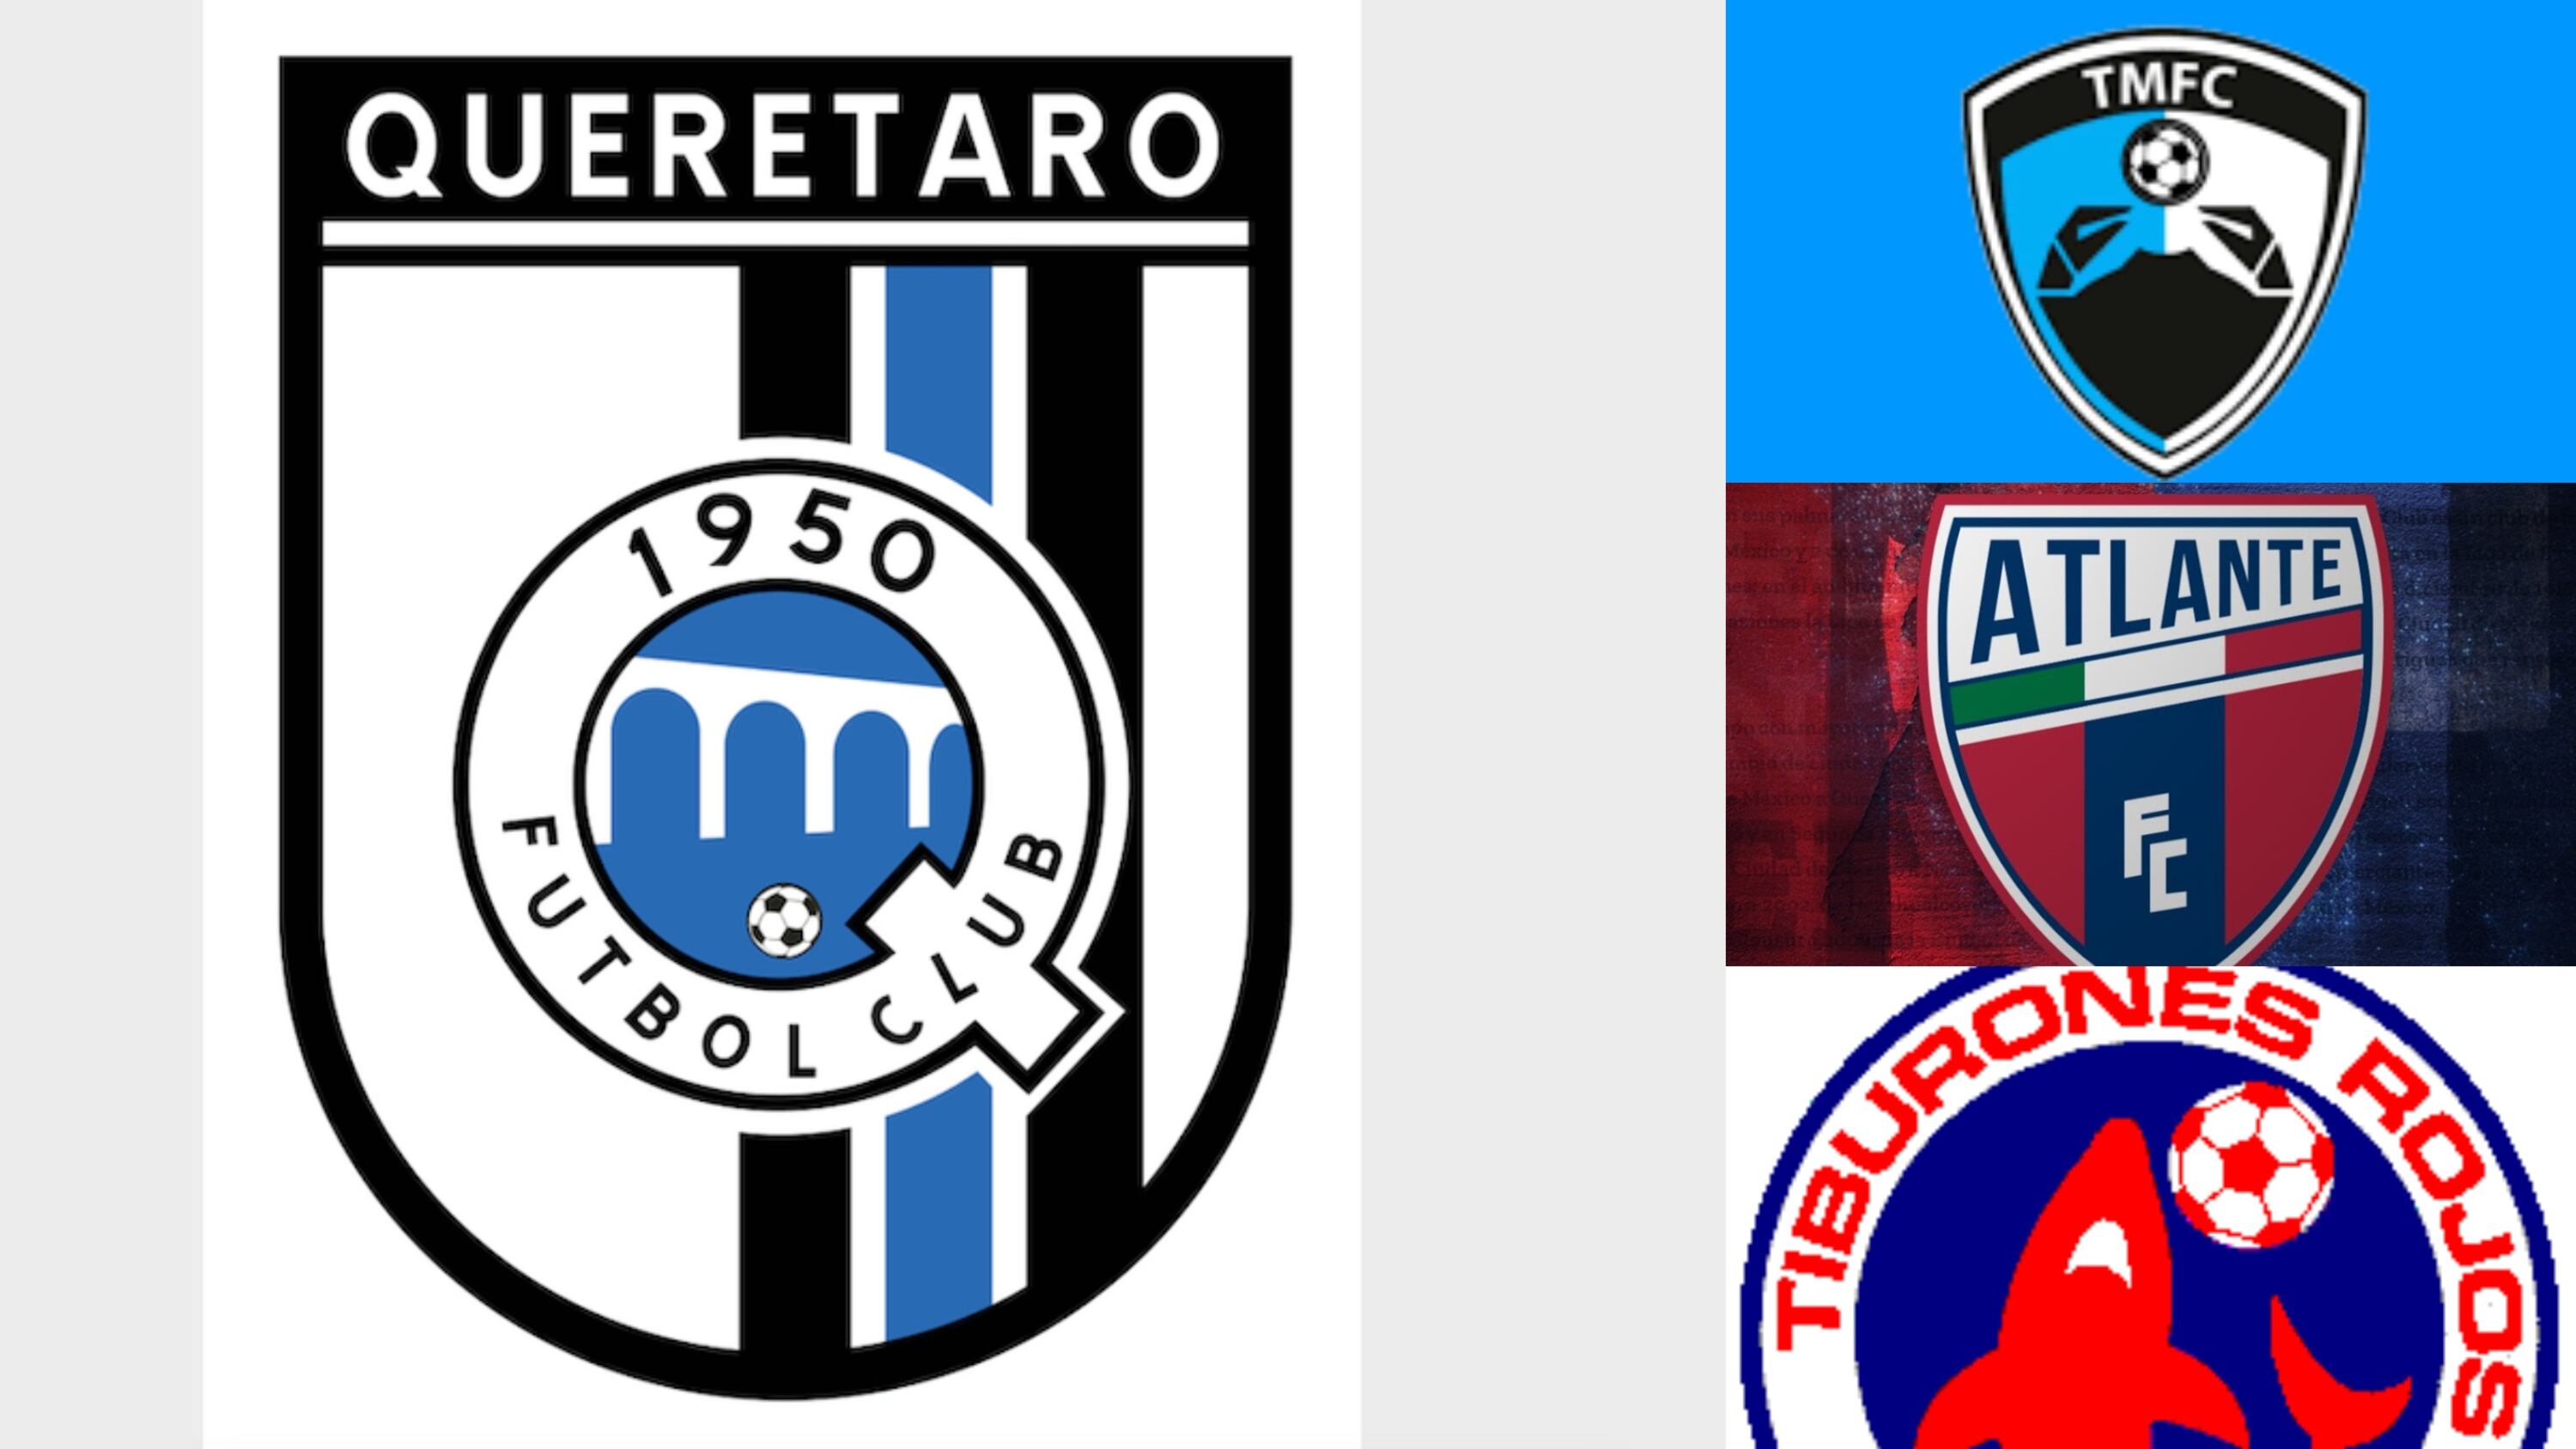 The team that could replace Club Querétaro in Liga MX if they get disaffiliated